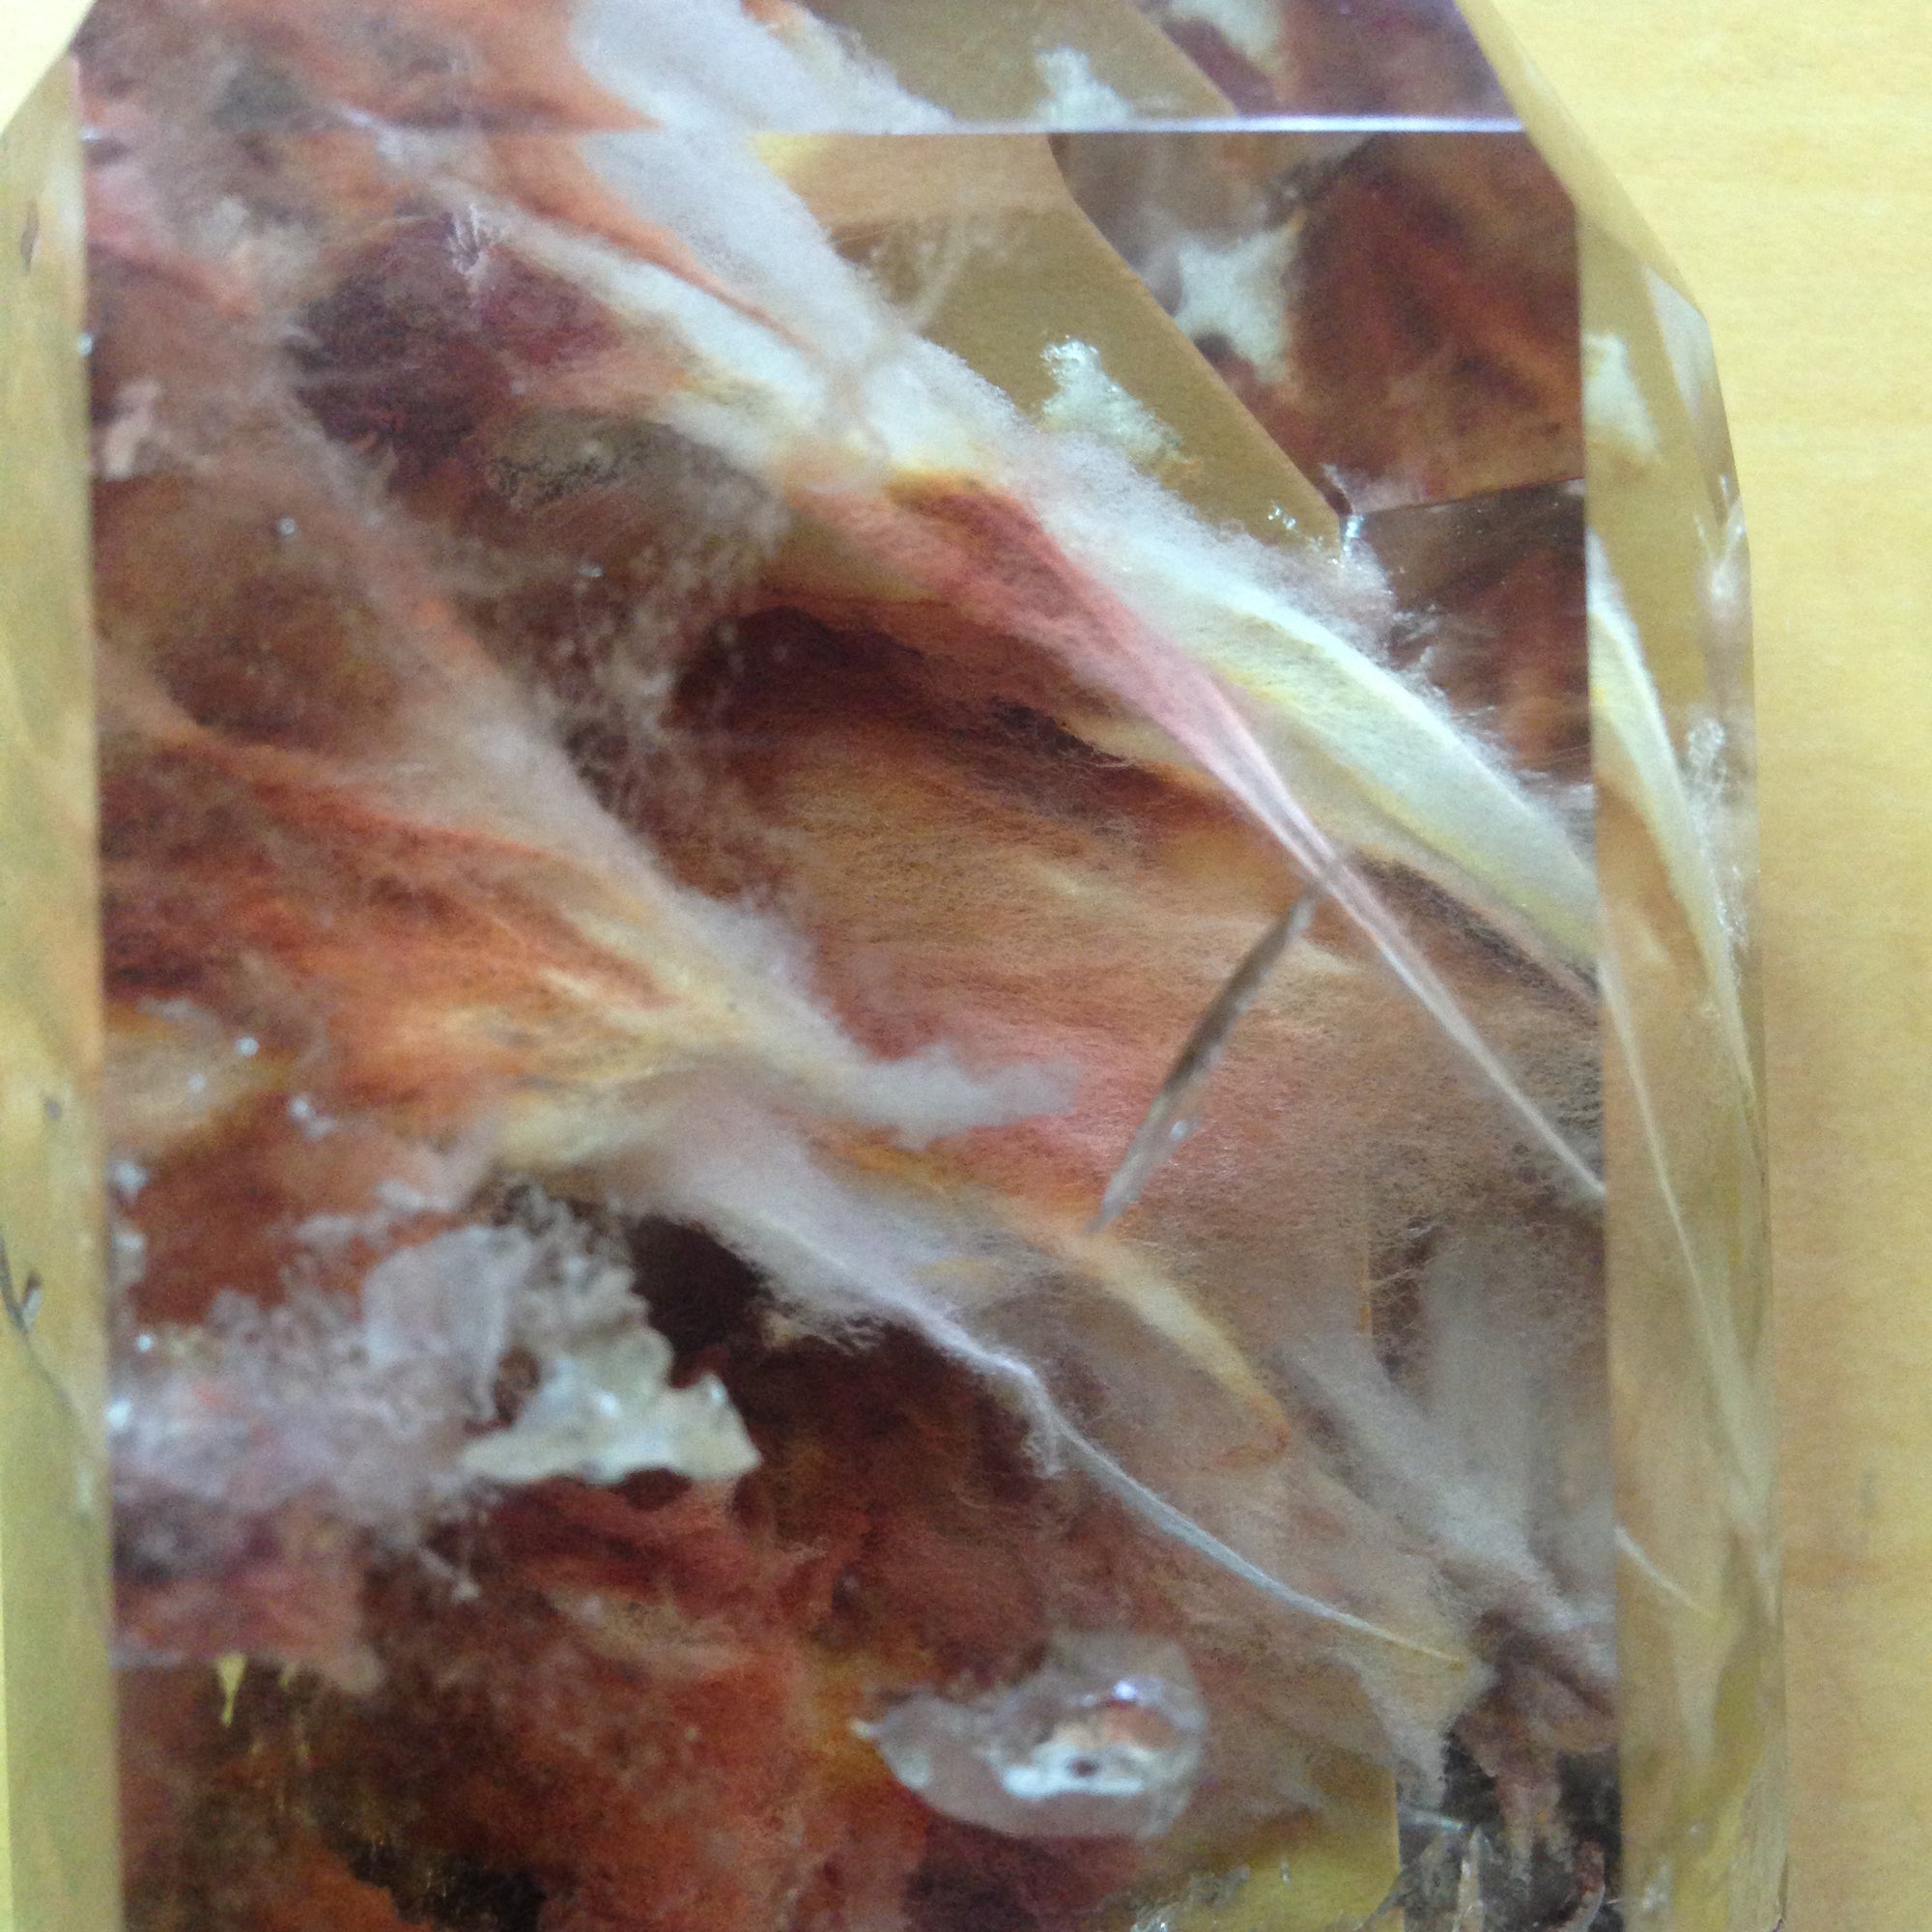 More New Mineral Specimens, Crystals and Animals